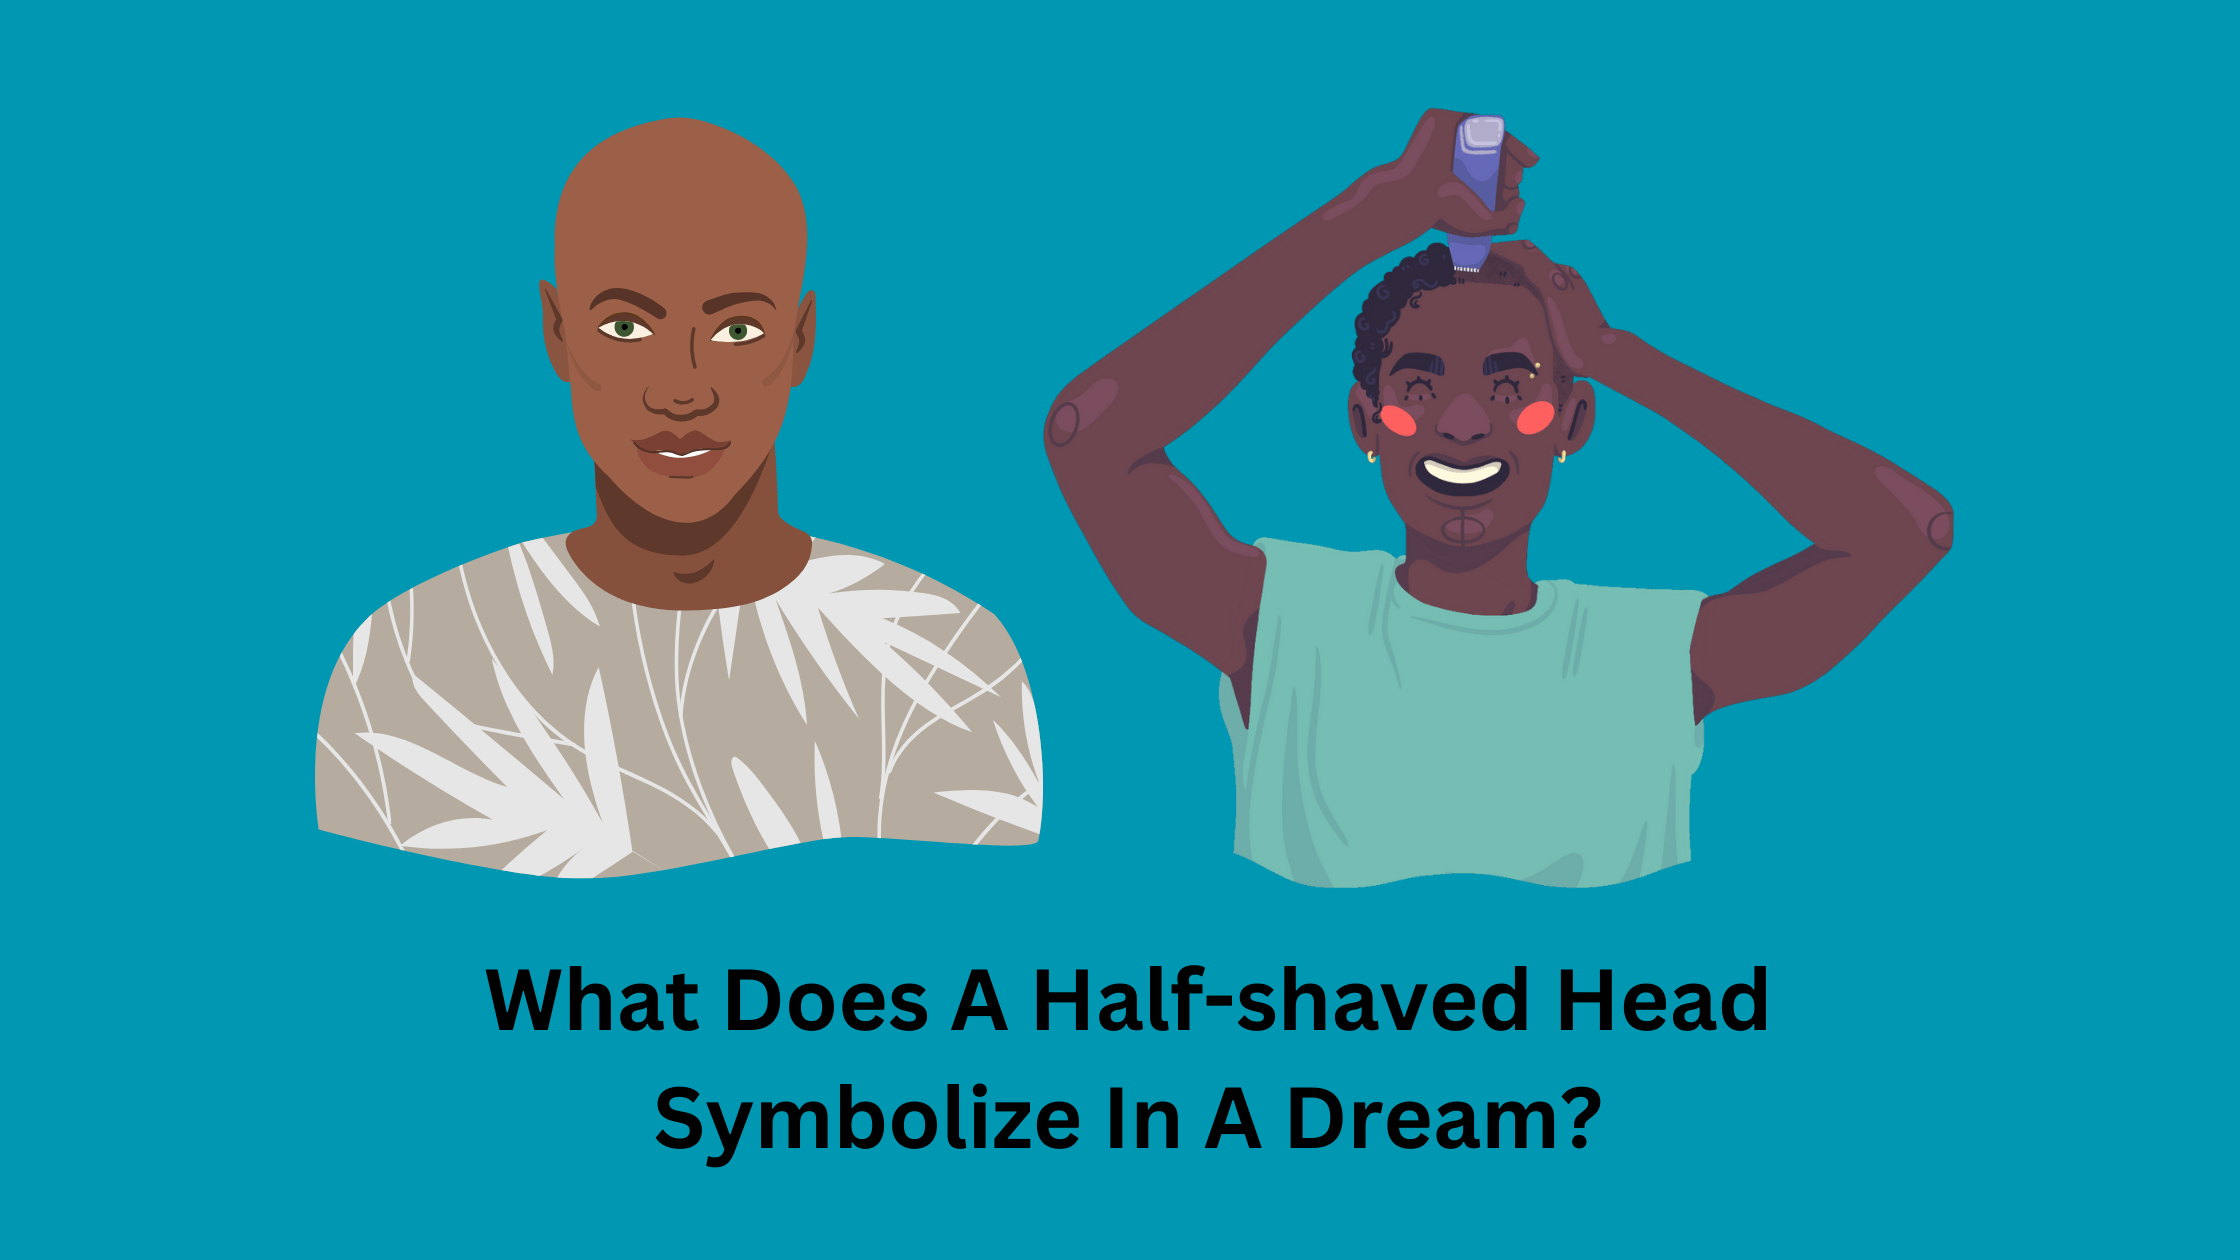 What Does A Half-shaved Head Symbolize In A Dream?